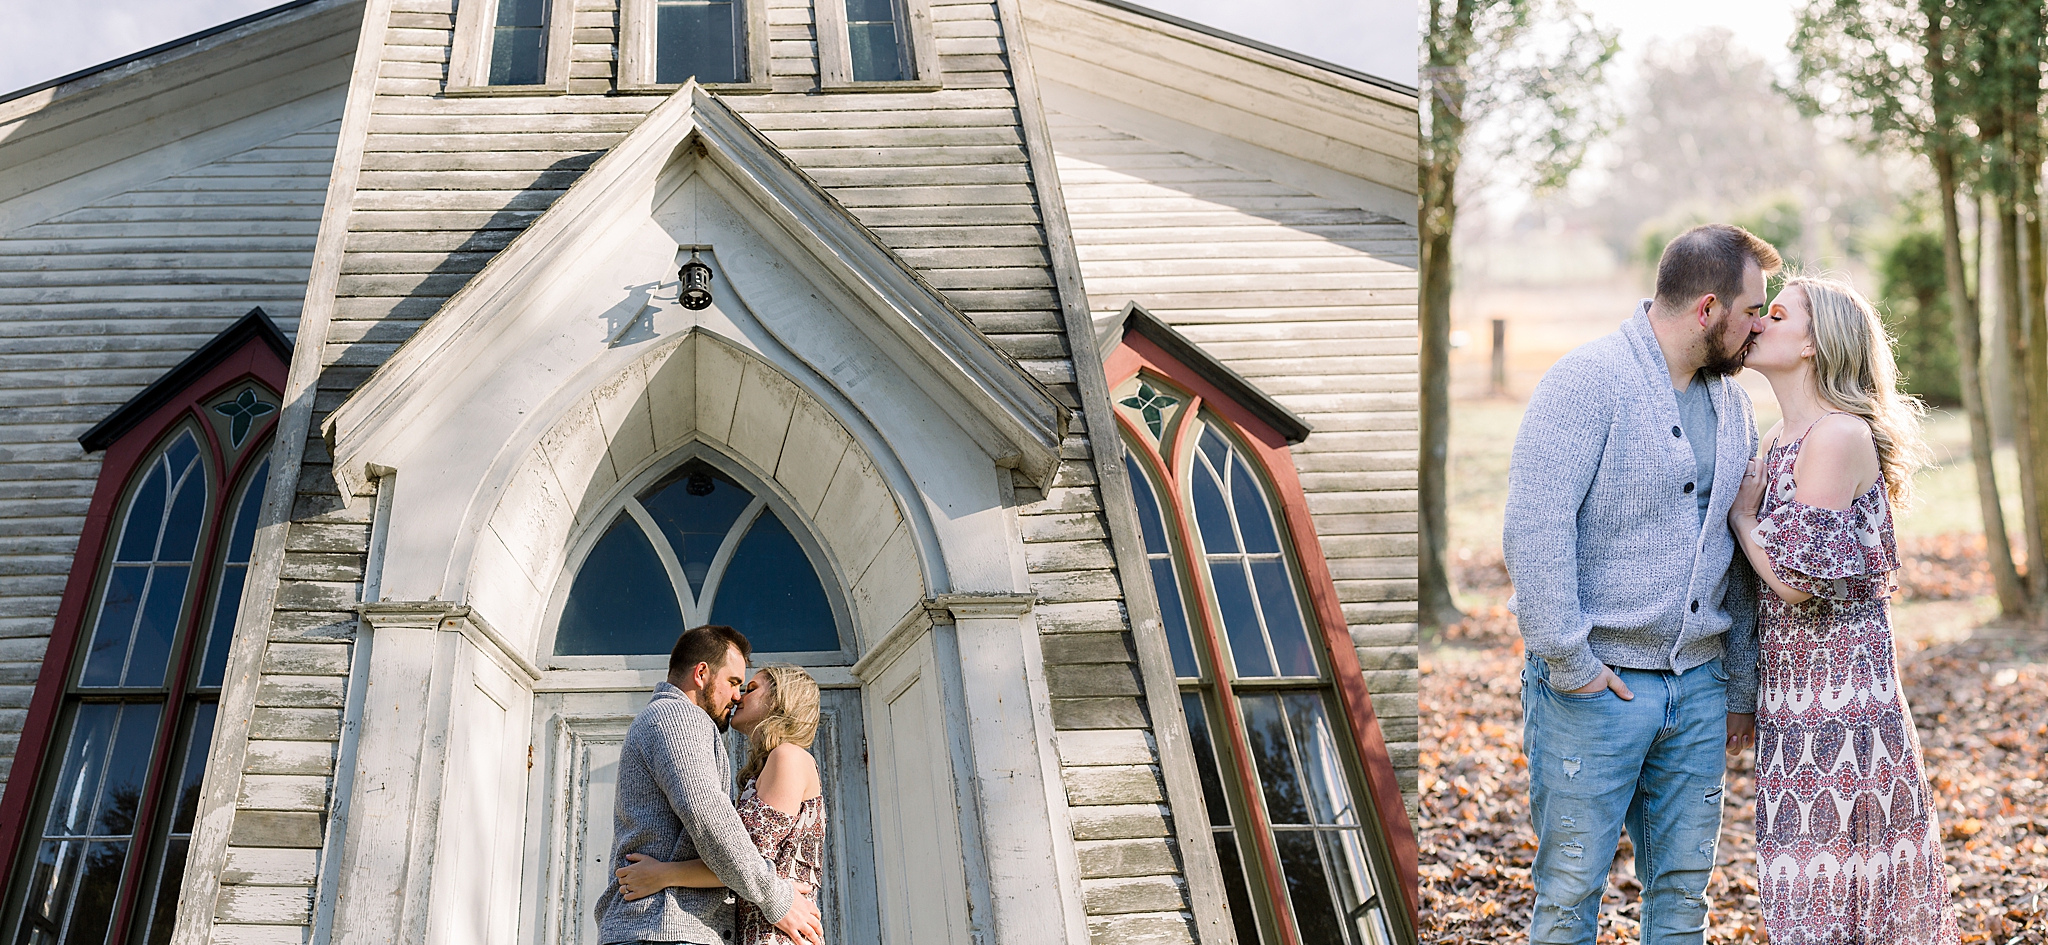 chapel, cranberry creek gardens, cranberry, creek, gardens, engagement, wedding, photography, Wesley Forbes Photography, fine art, London, Ontario, Delhi, St. Thomas, married, engaged, ring, light, airy